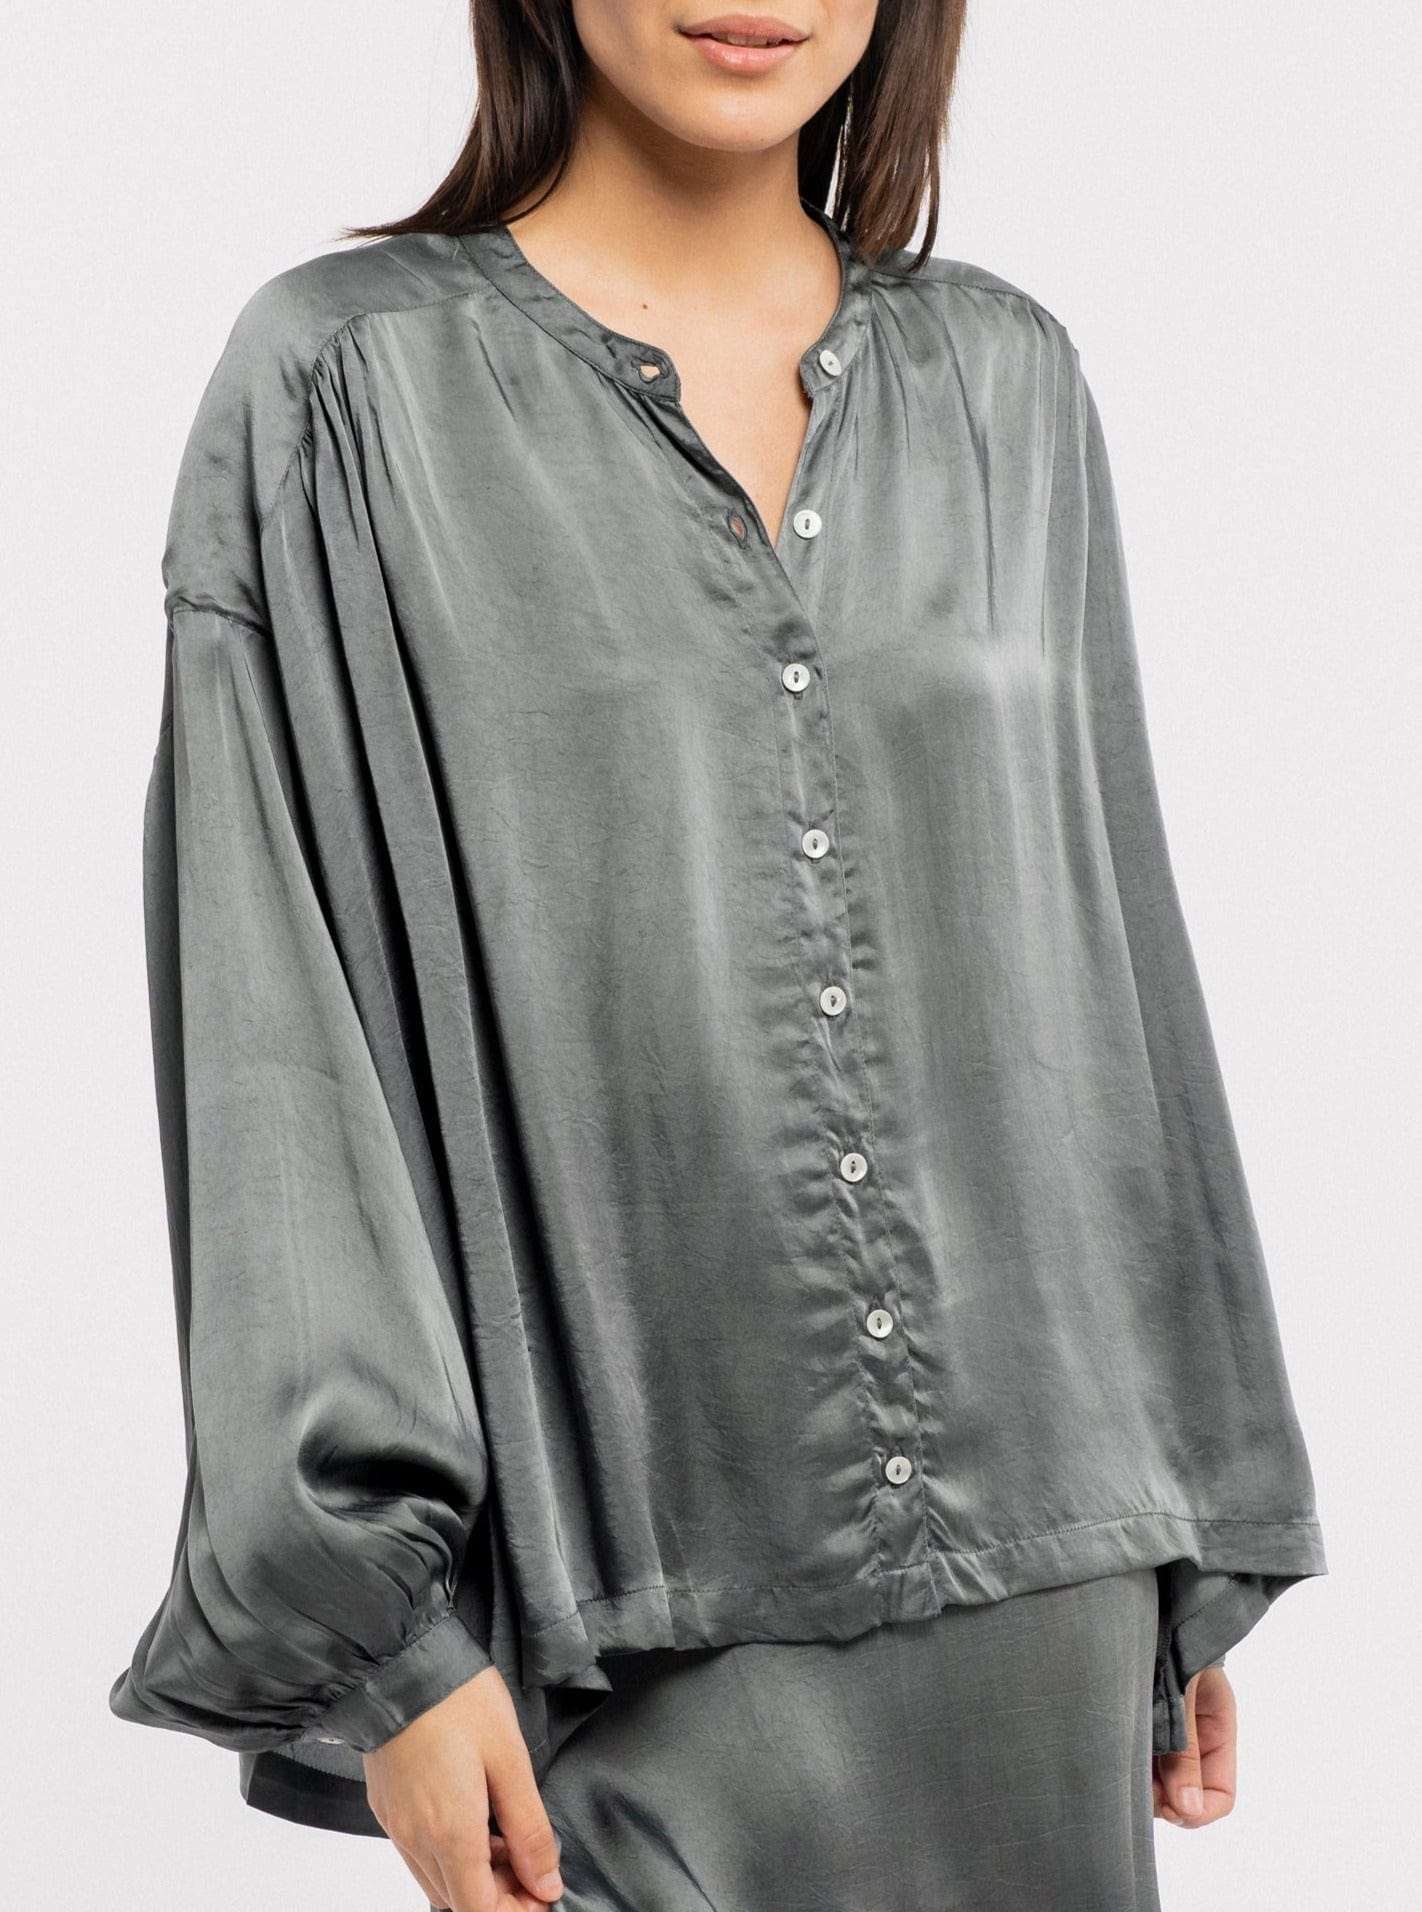 The model is wearing a sustainable grey silk Francoise Top - Slate.